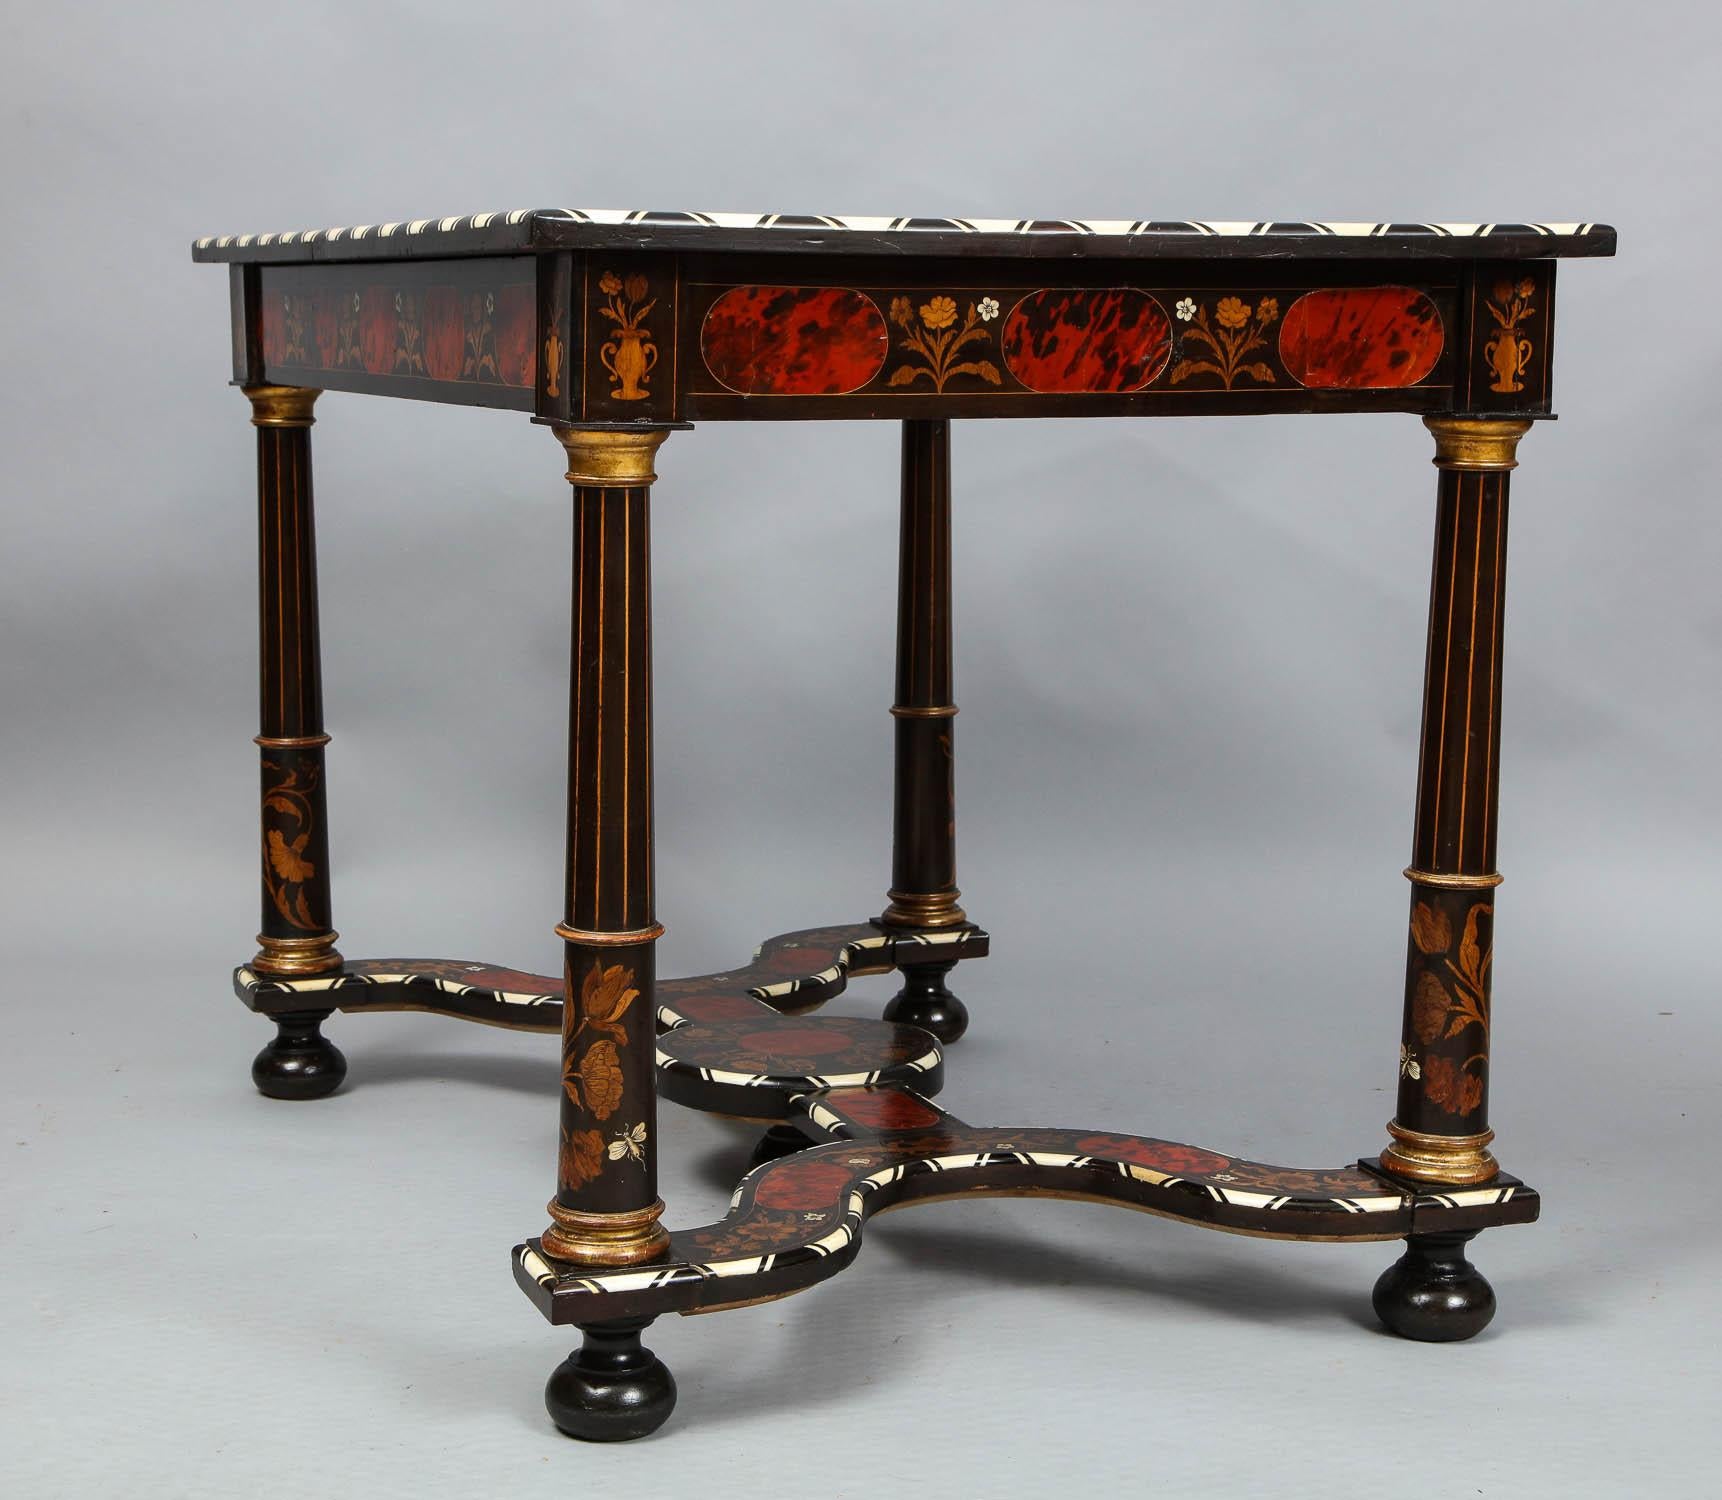 Flemish Baroque Marquetry Decorated Table For Sale 3